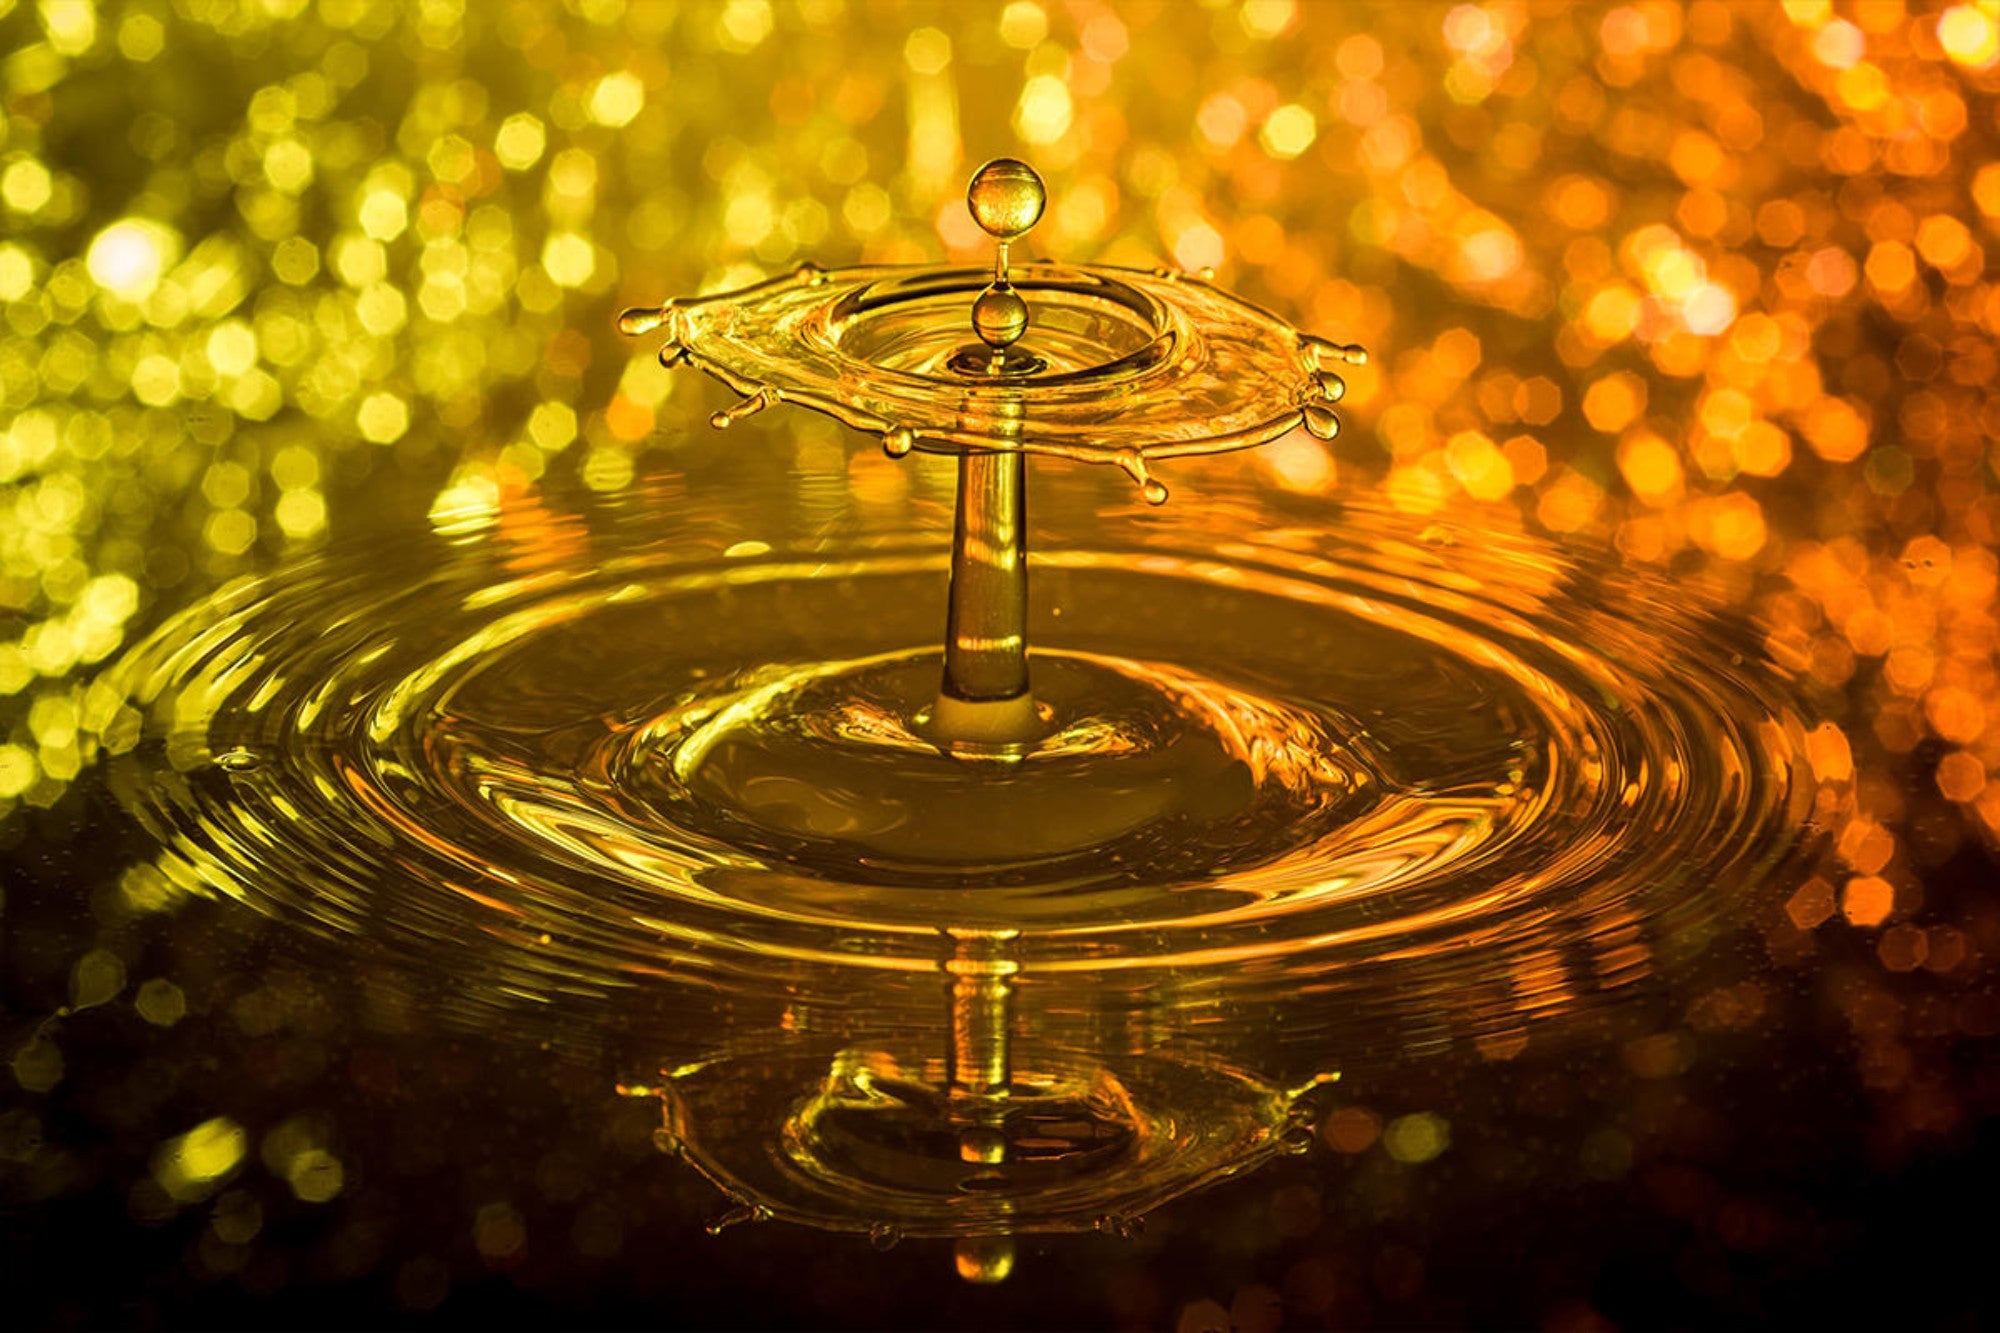 Water Drop Photography for Beginners: Fun Ideas & Tips